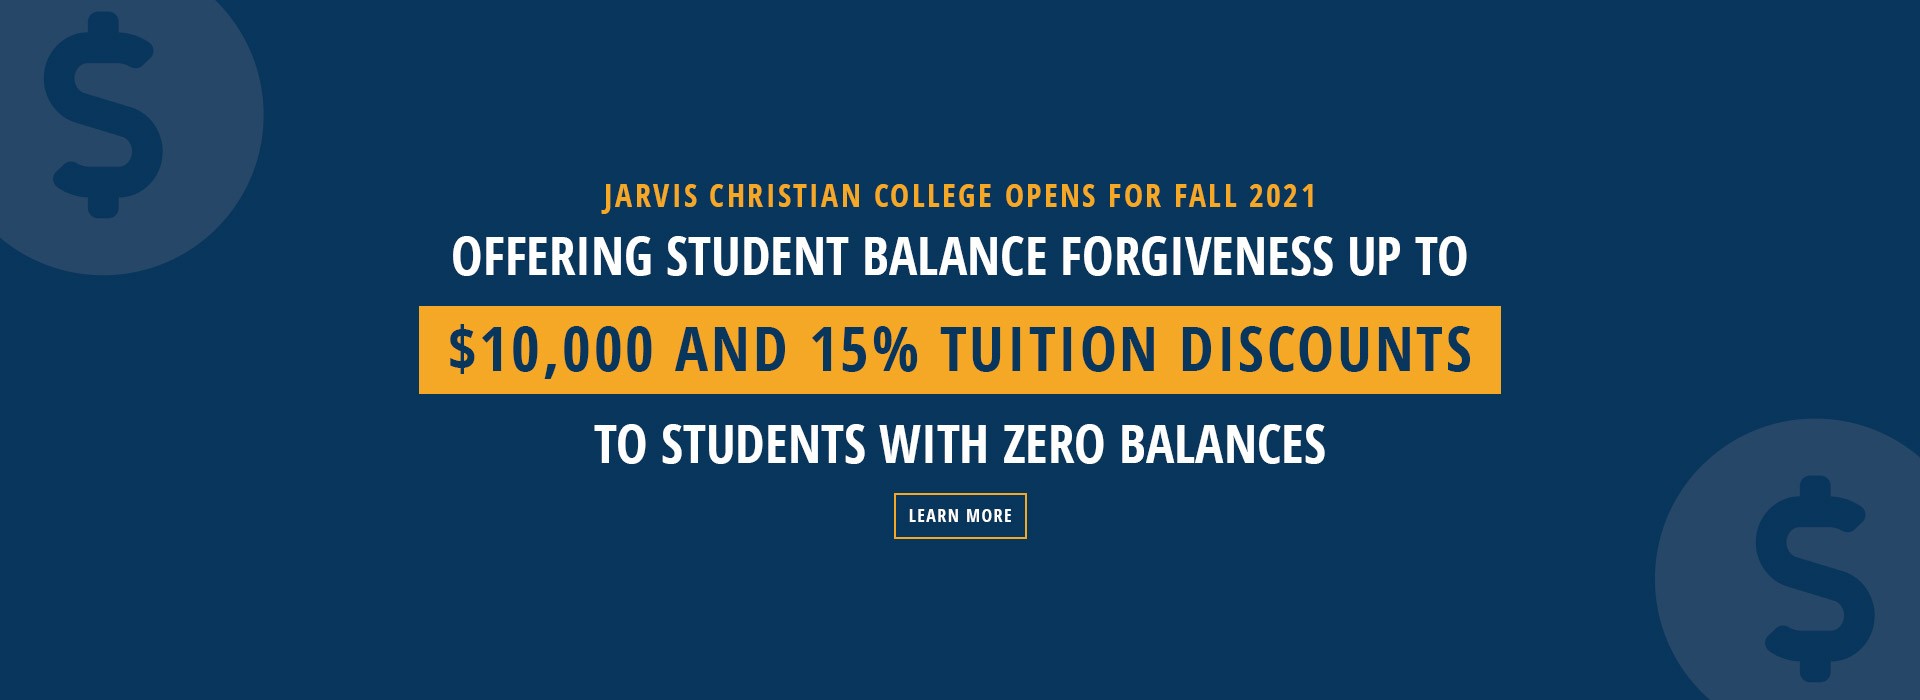 Jarvis Christian College offers 15% tuition discounts.